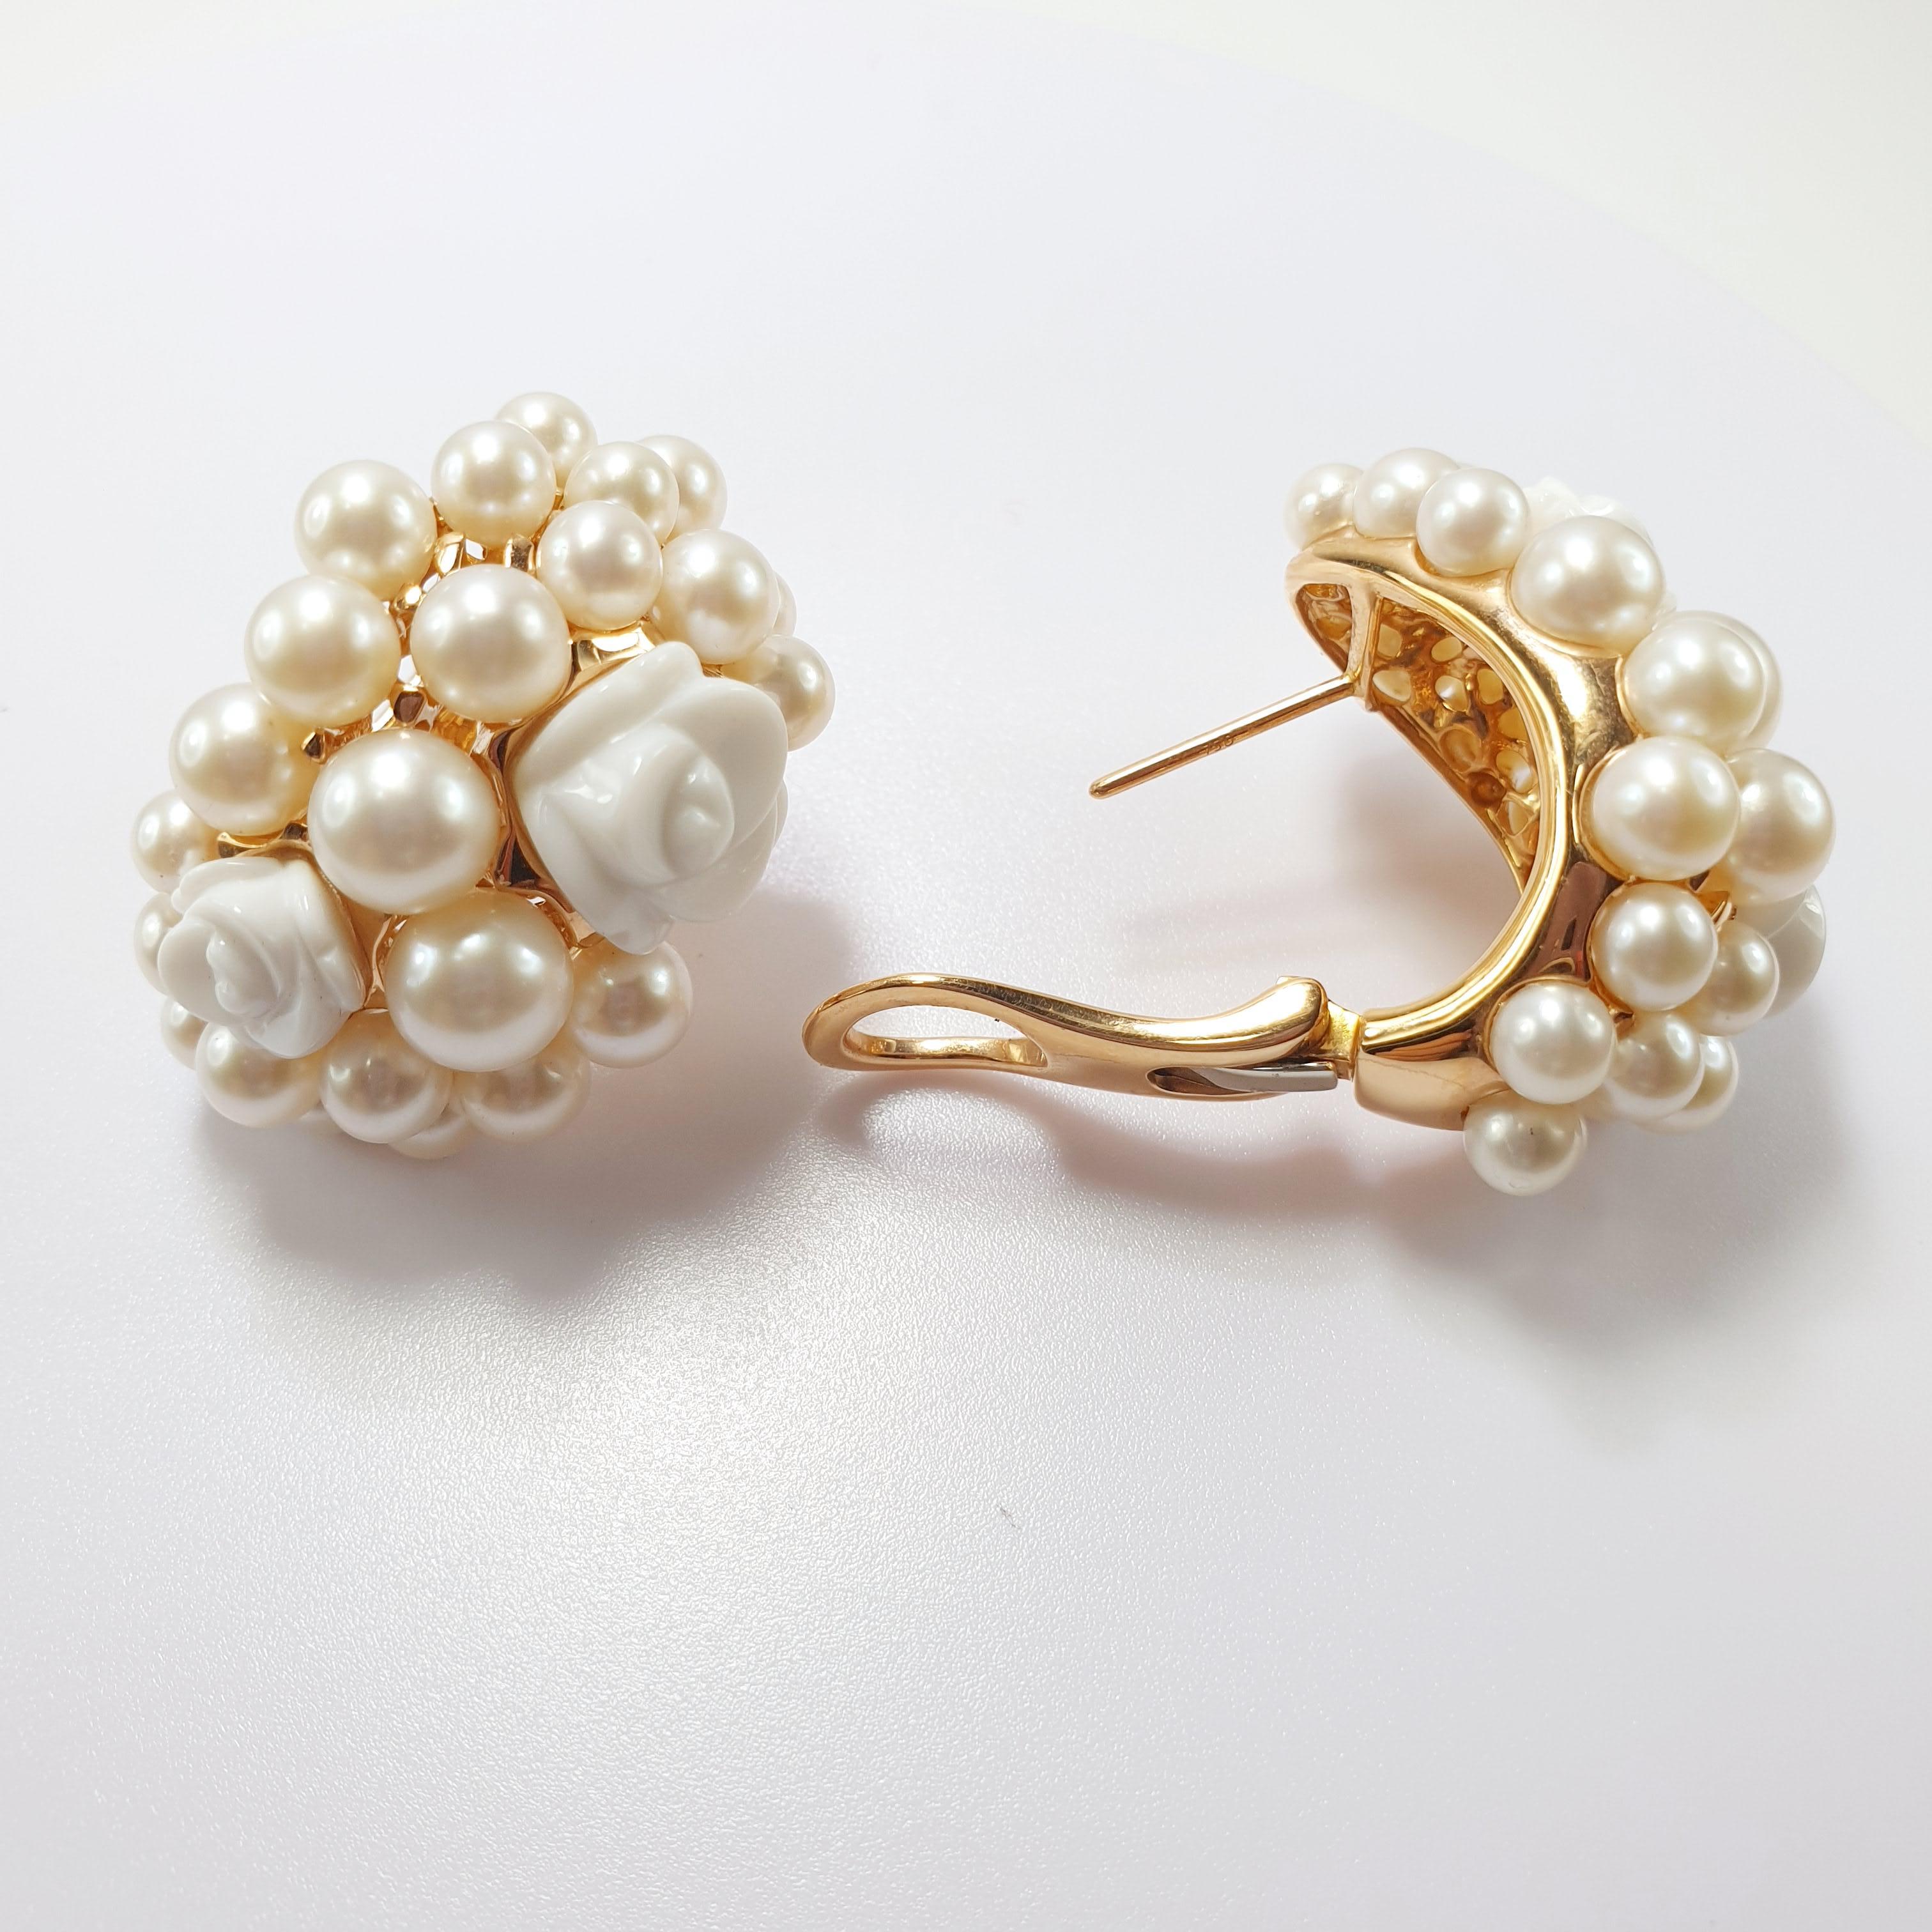 Contemporary Mimi Milano 18 Karat Rose Gold Earrings with Agate Flowers and Pearls For Sale